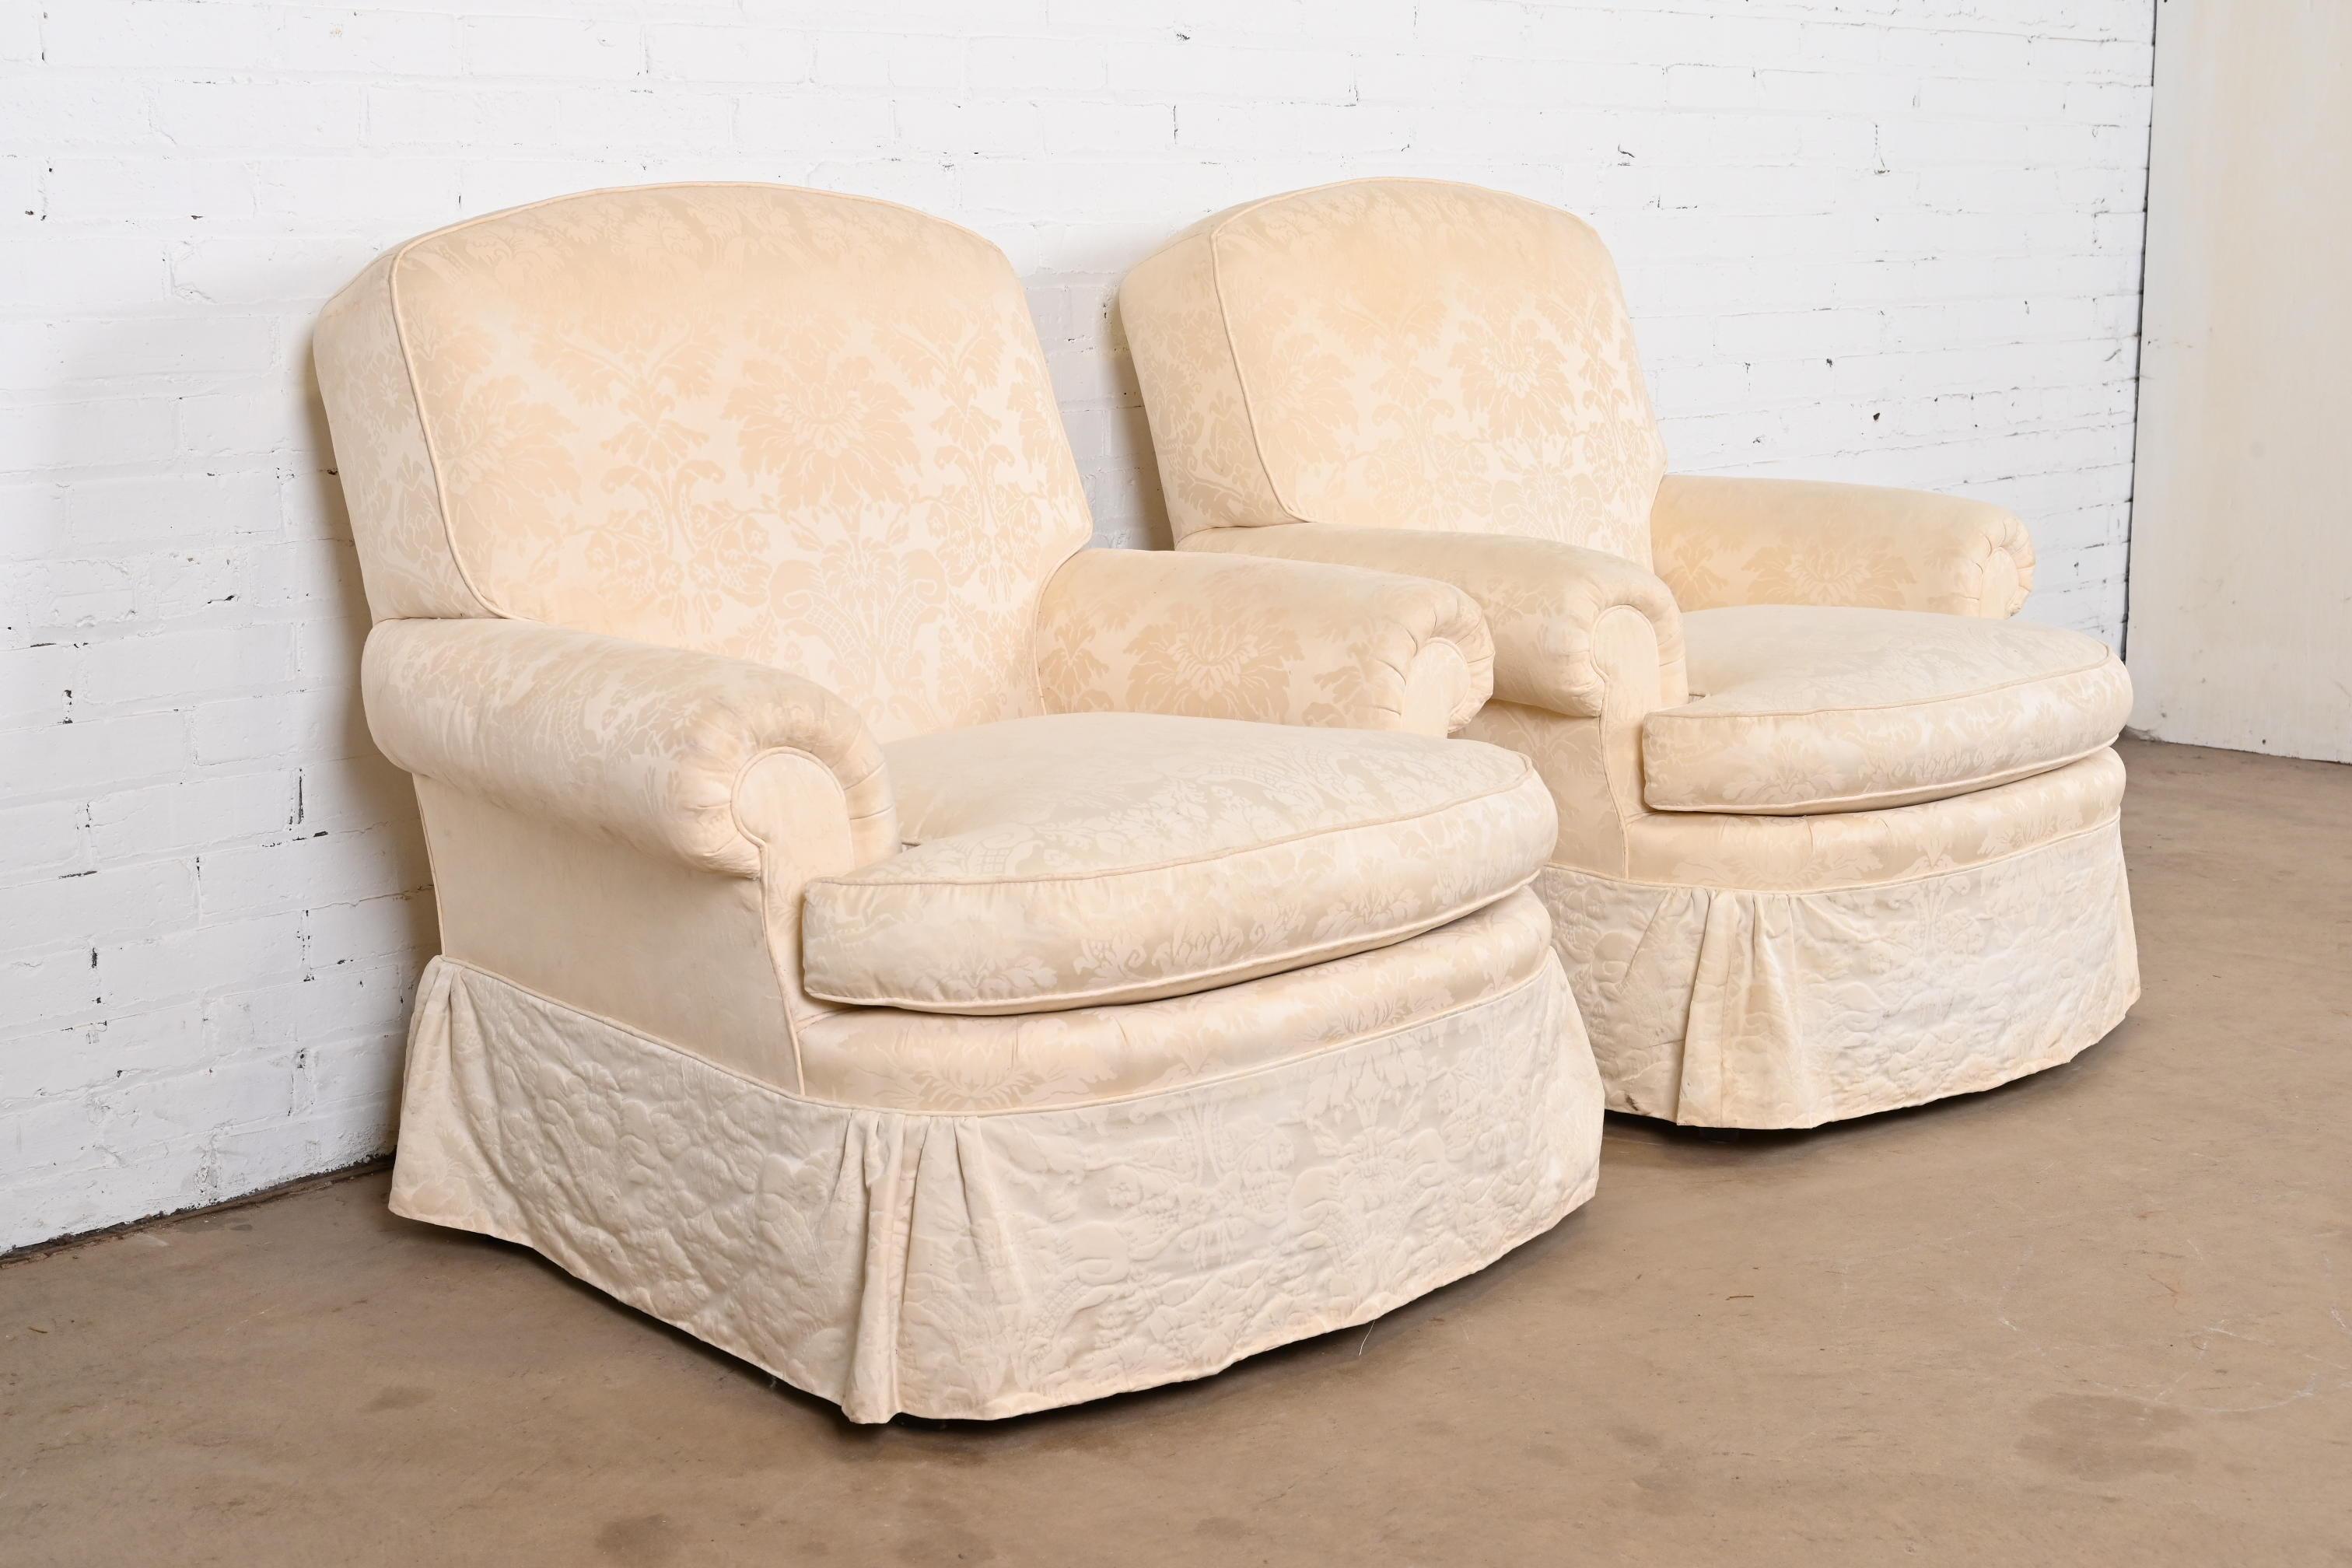 Baker Furniture Damask Upholstered Lounge Chairs, One Chair 1